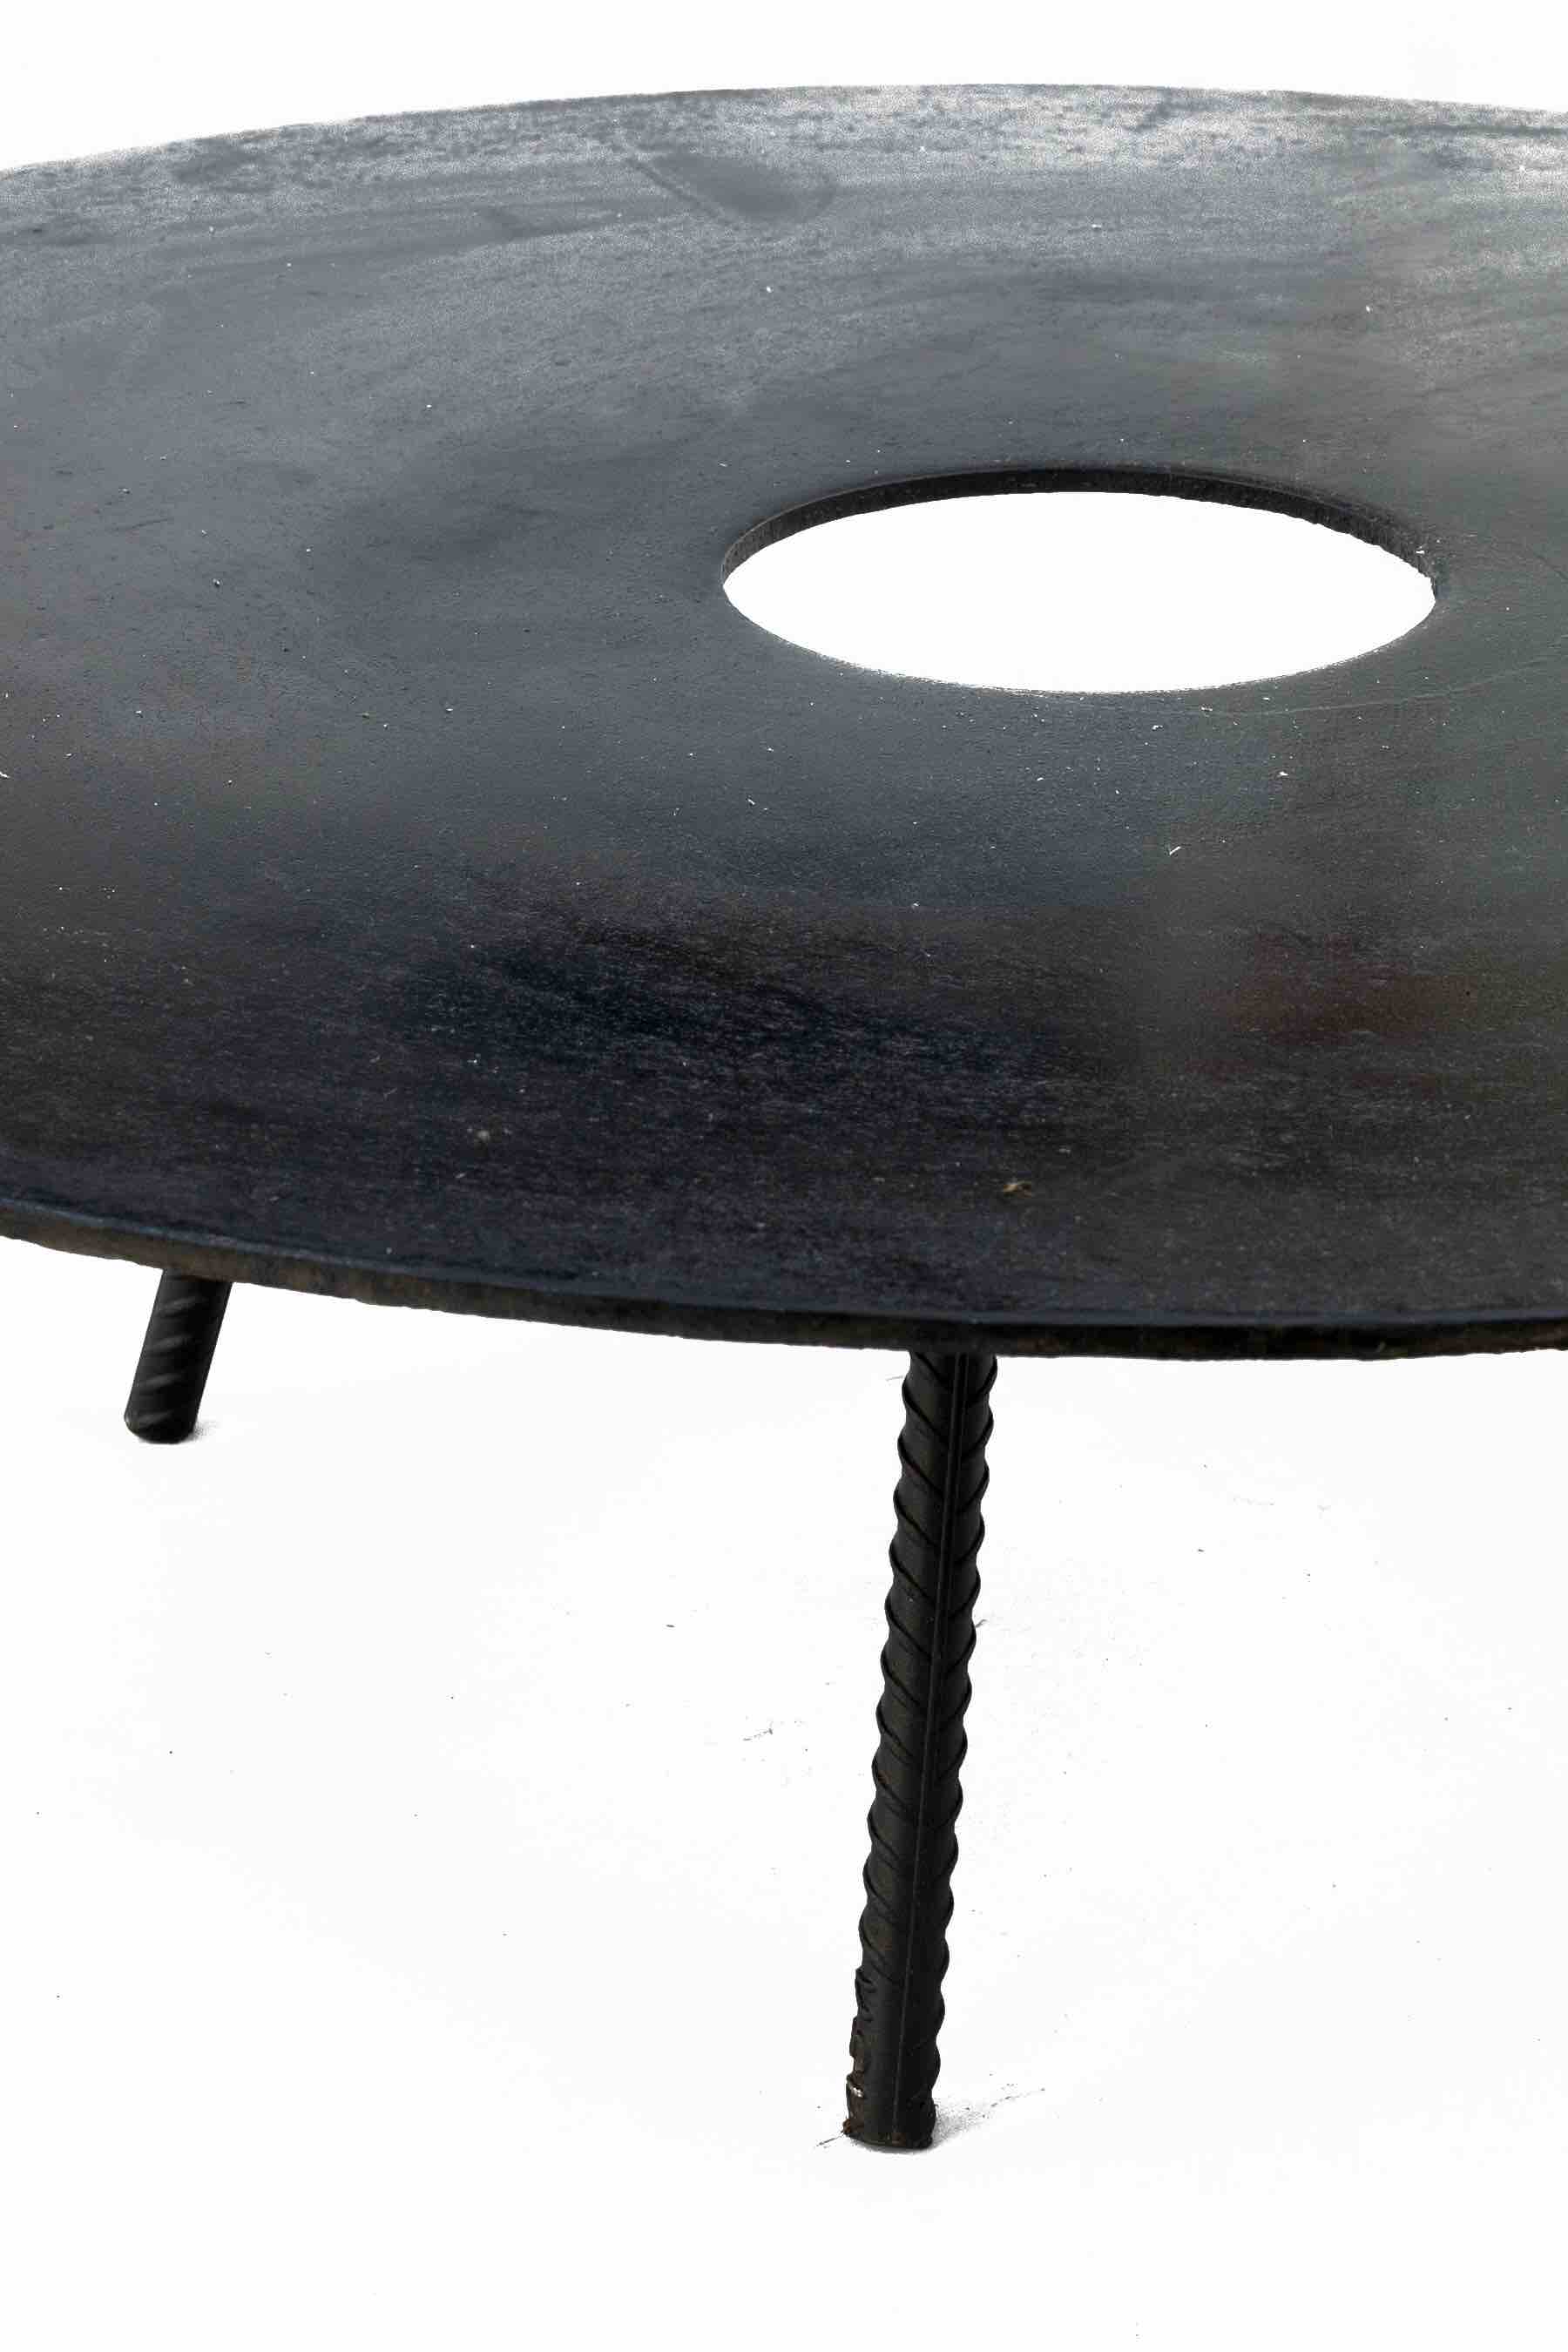 Hot Plate Collection, Firepit With hot Plate, Hotplate BBQ, Firepits UK